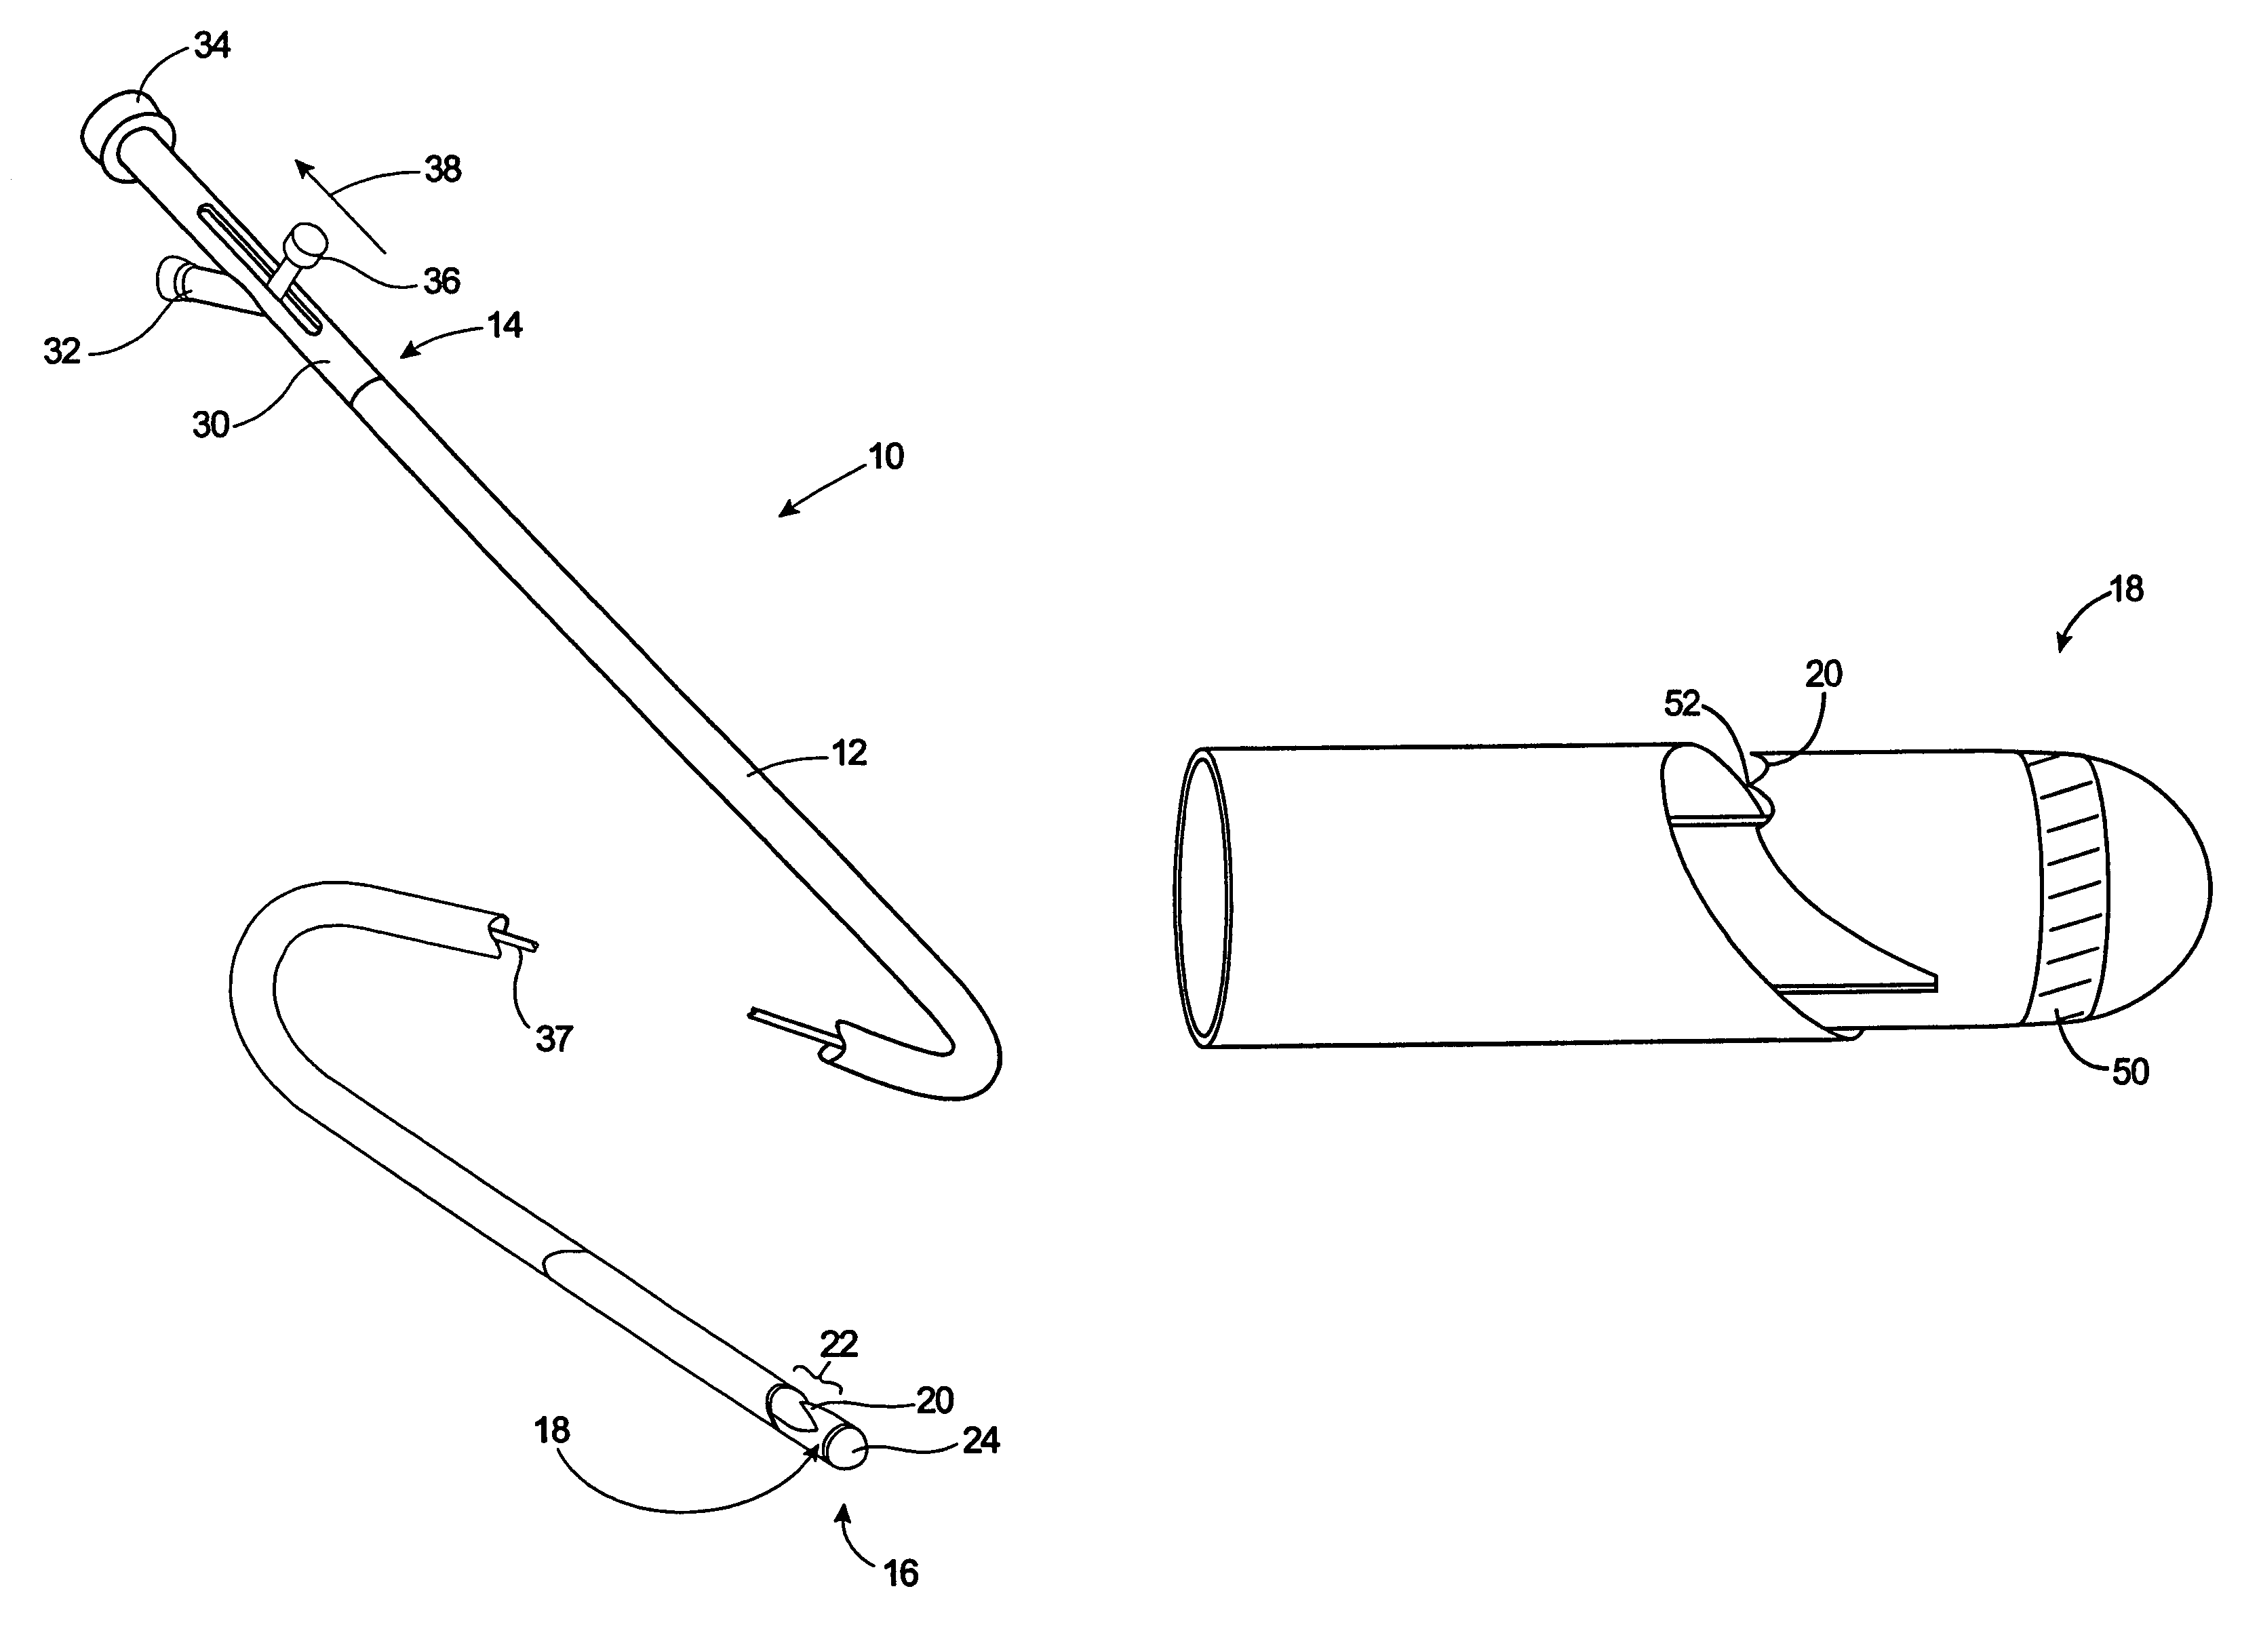 Atherectomy catheter with aligned imager